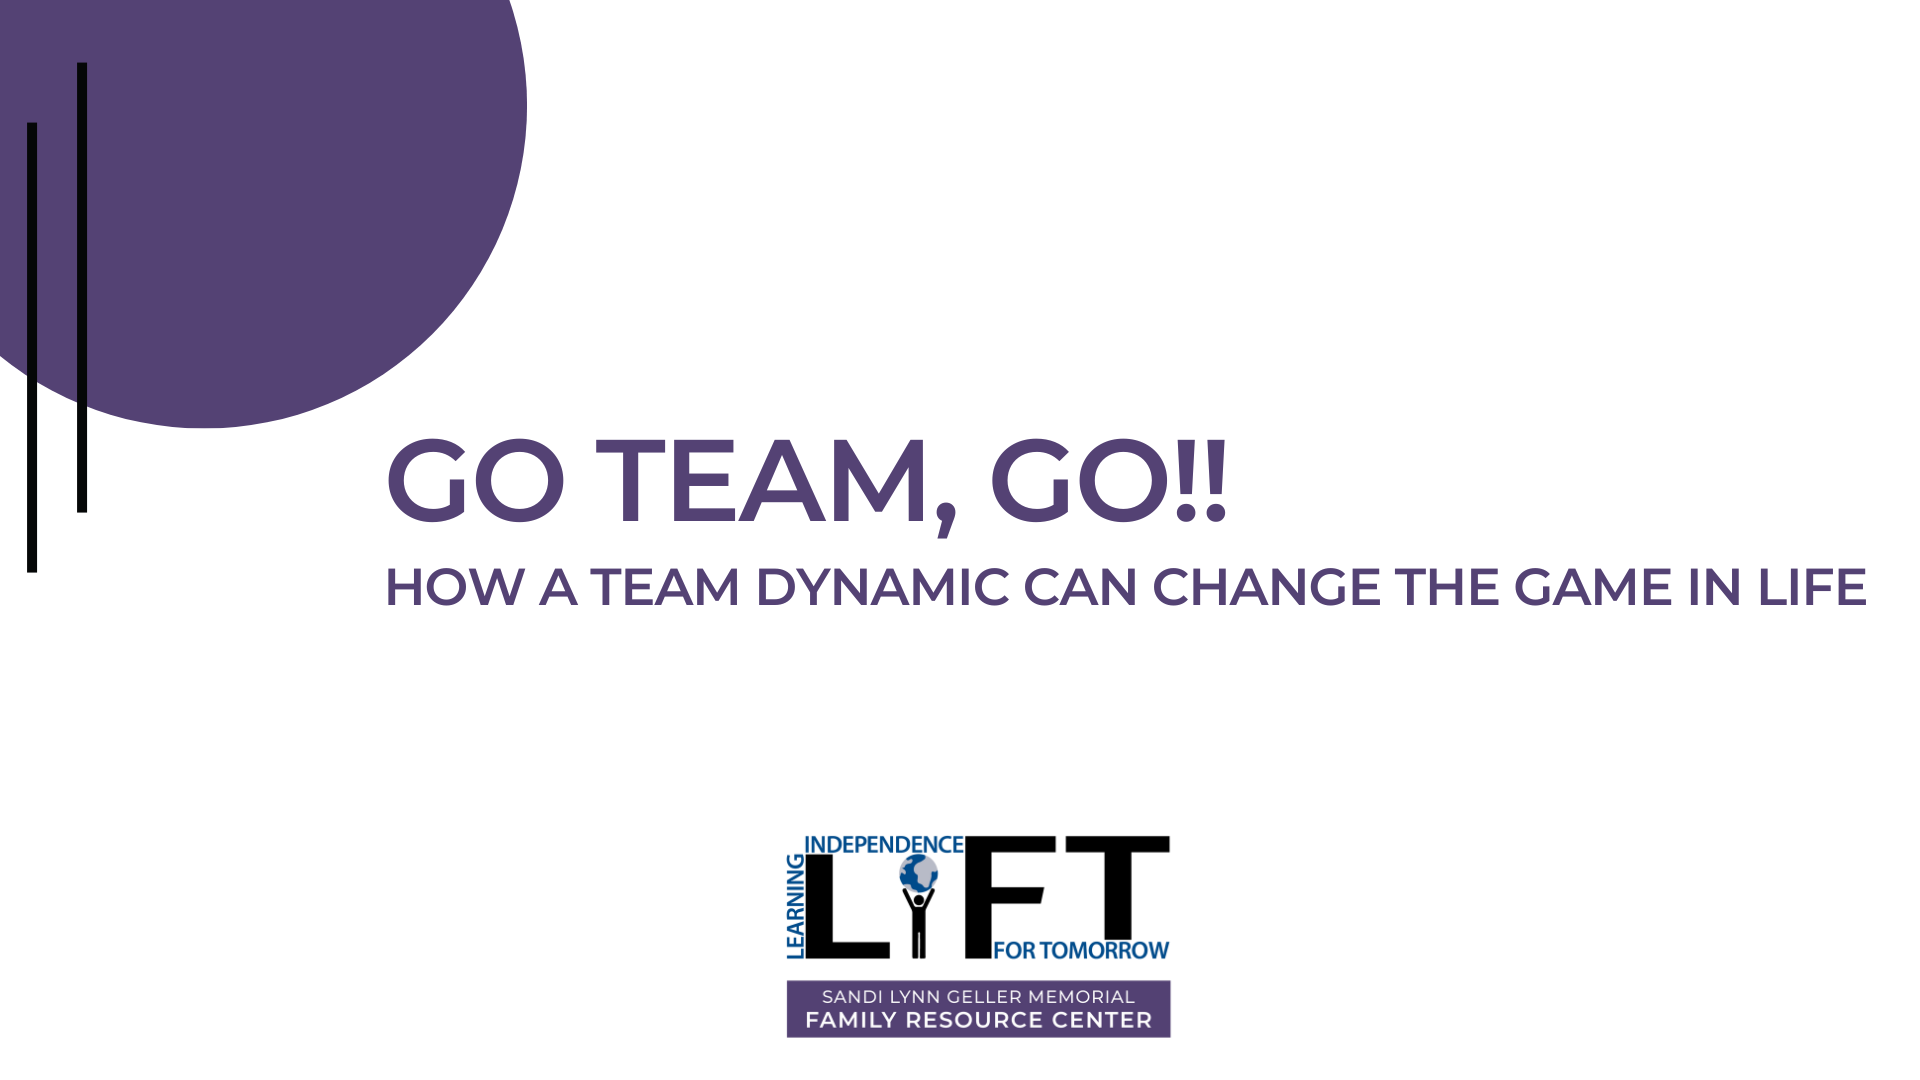 Go Team, Go! How a Team Dynamic Can Change the Game in Life